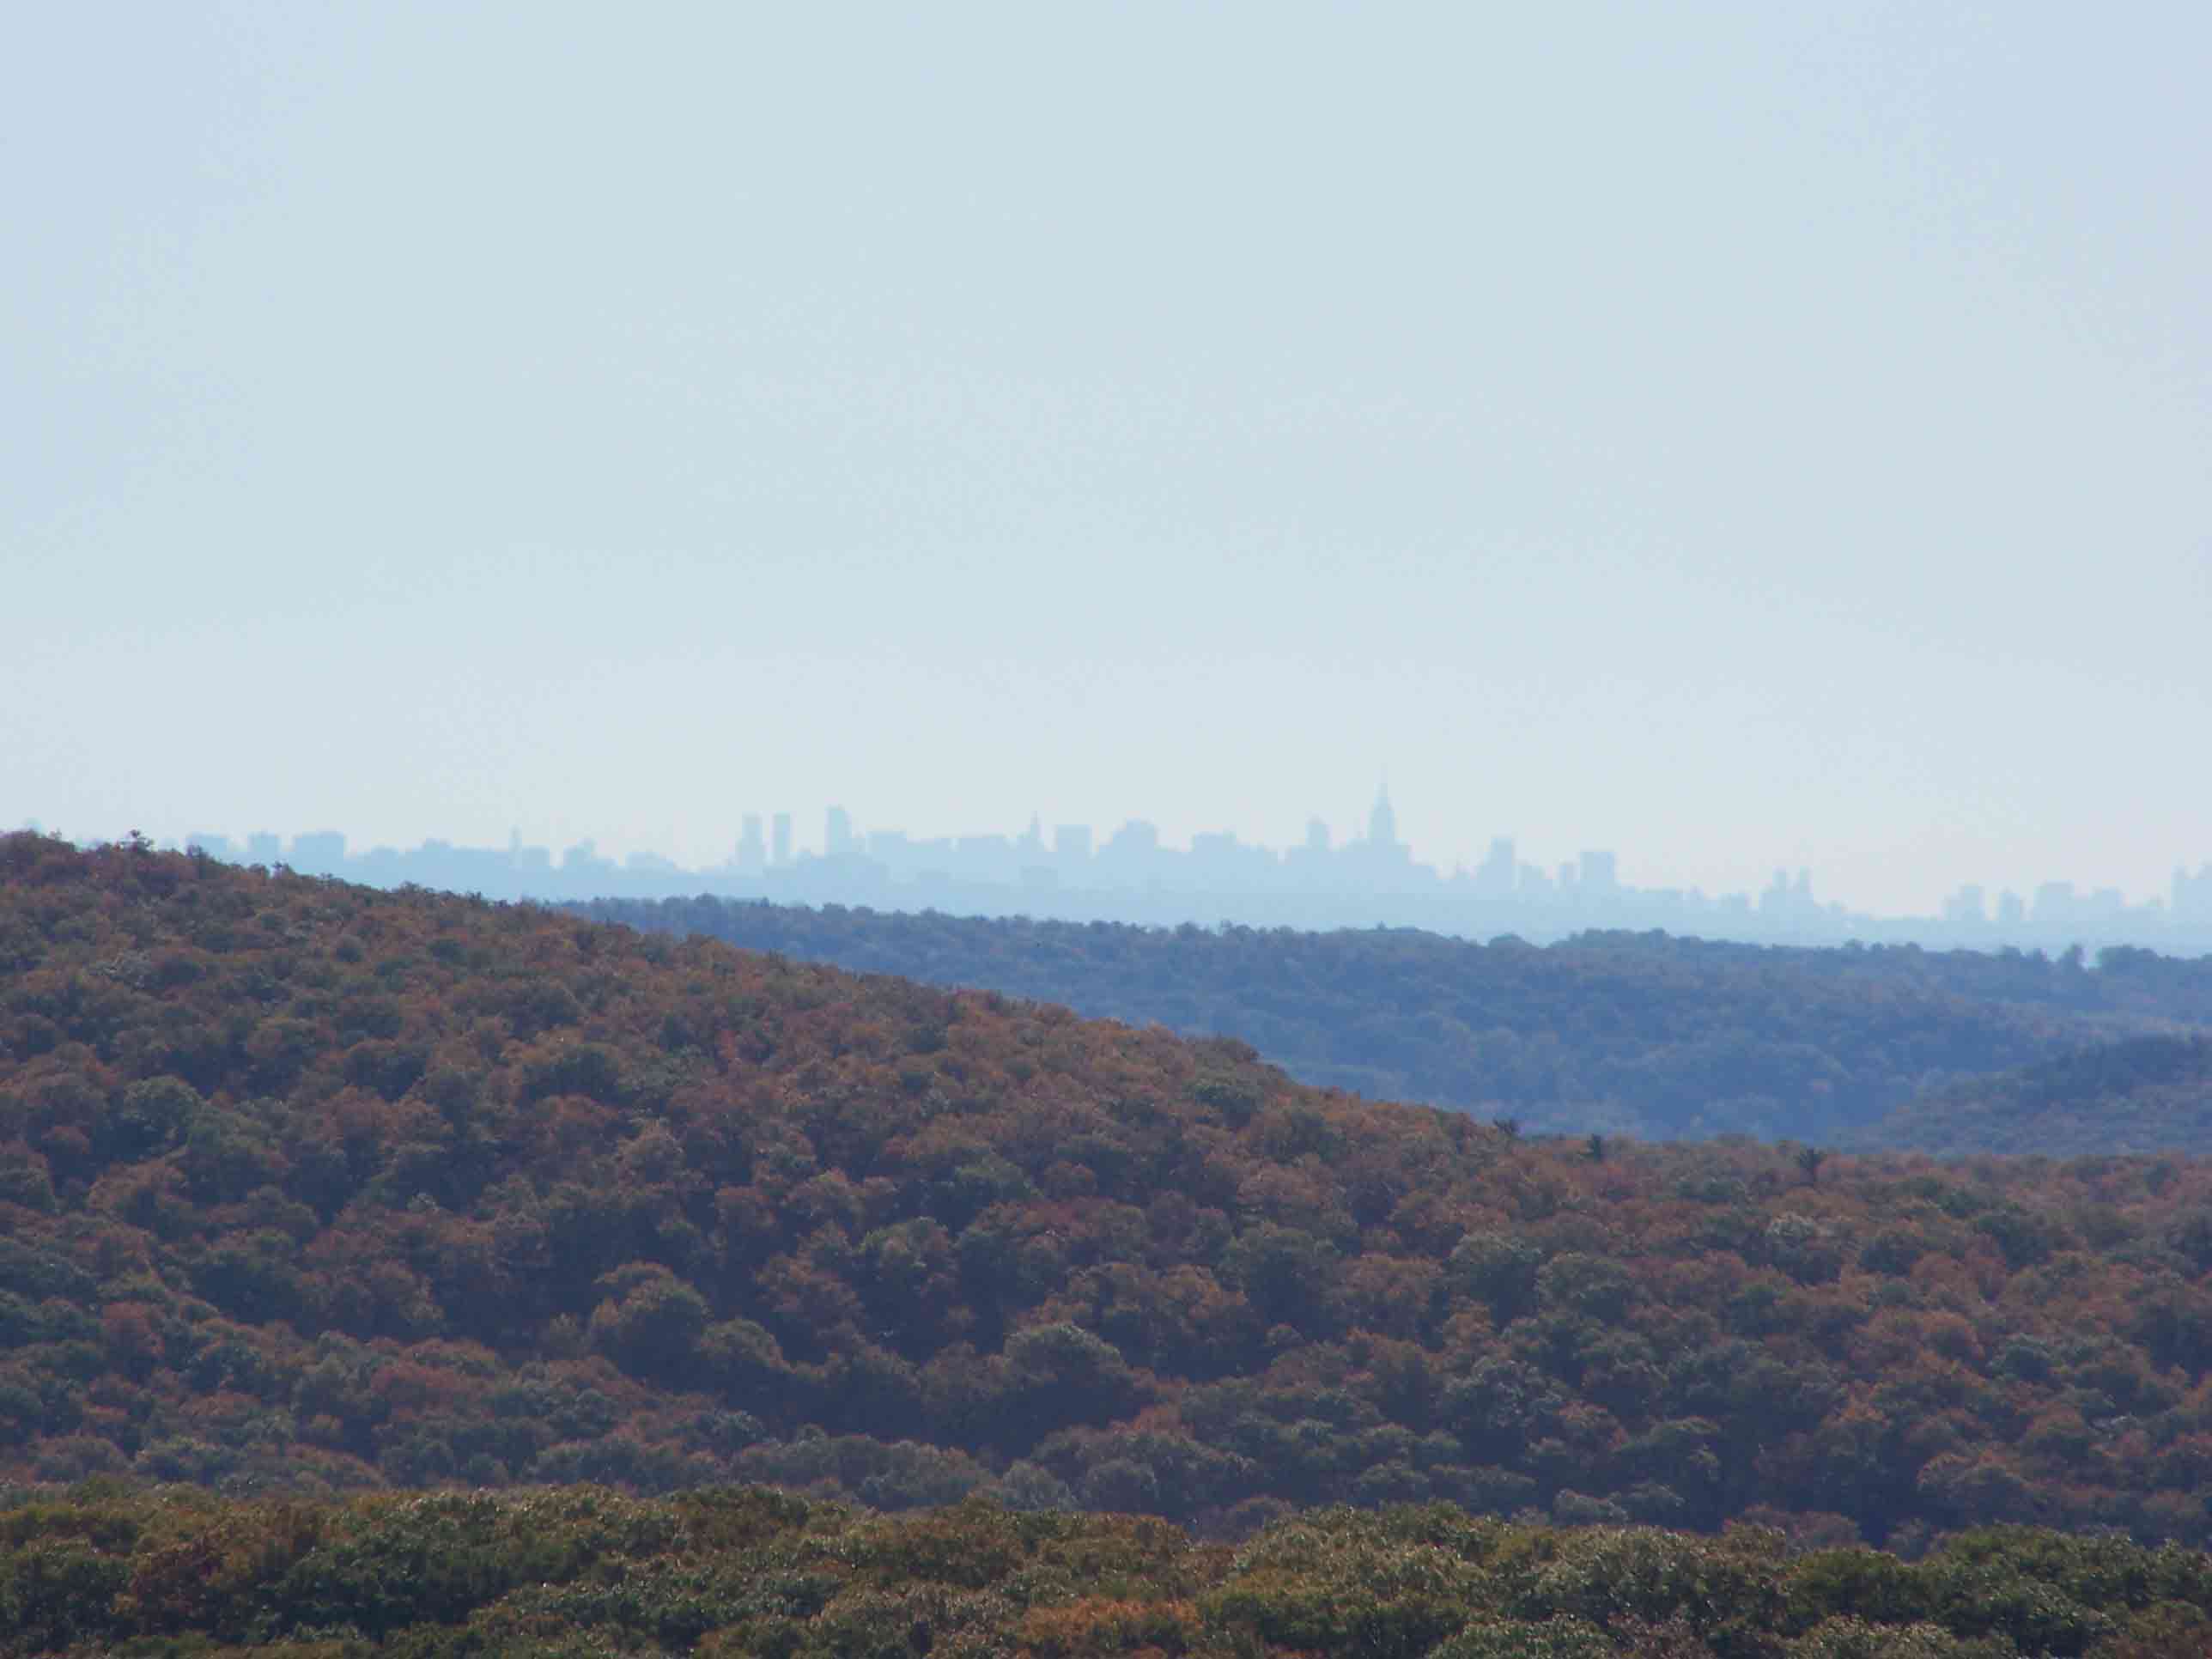 mm 8.5 View of New York City skyline from Black Mountain with NYC in the distance. Courtesy at@rohland.org